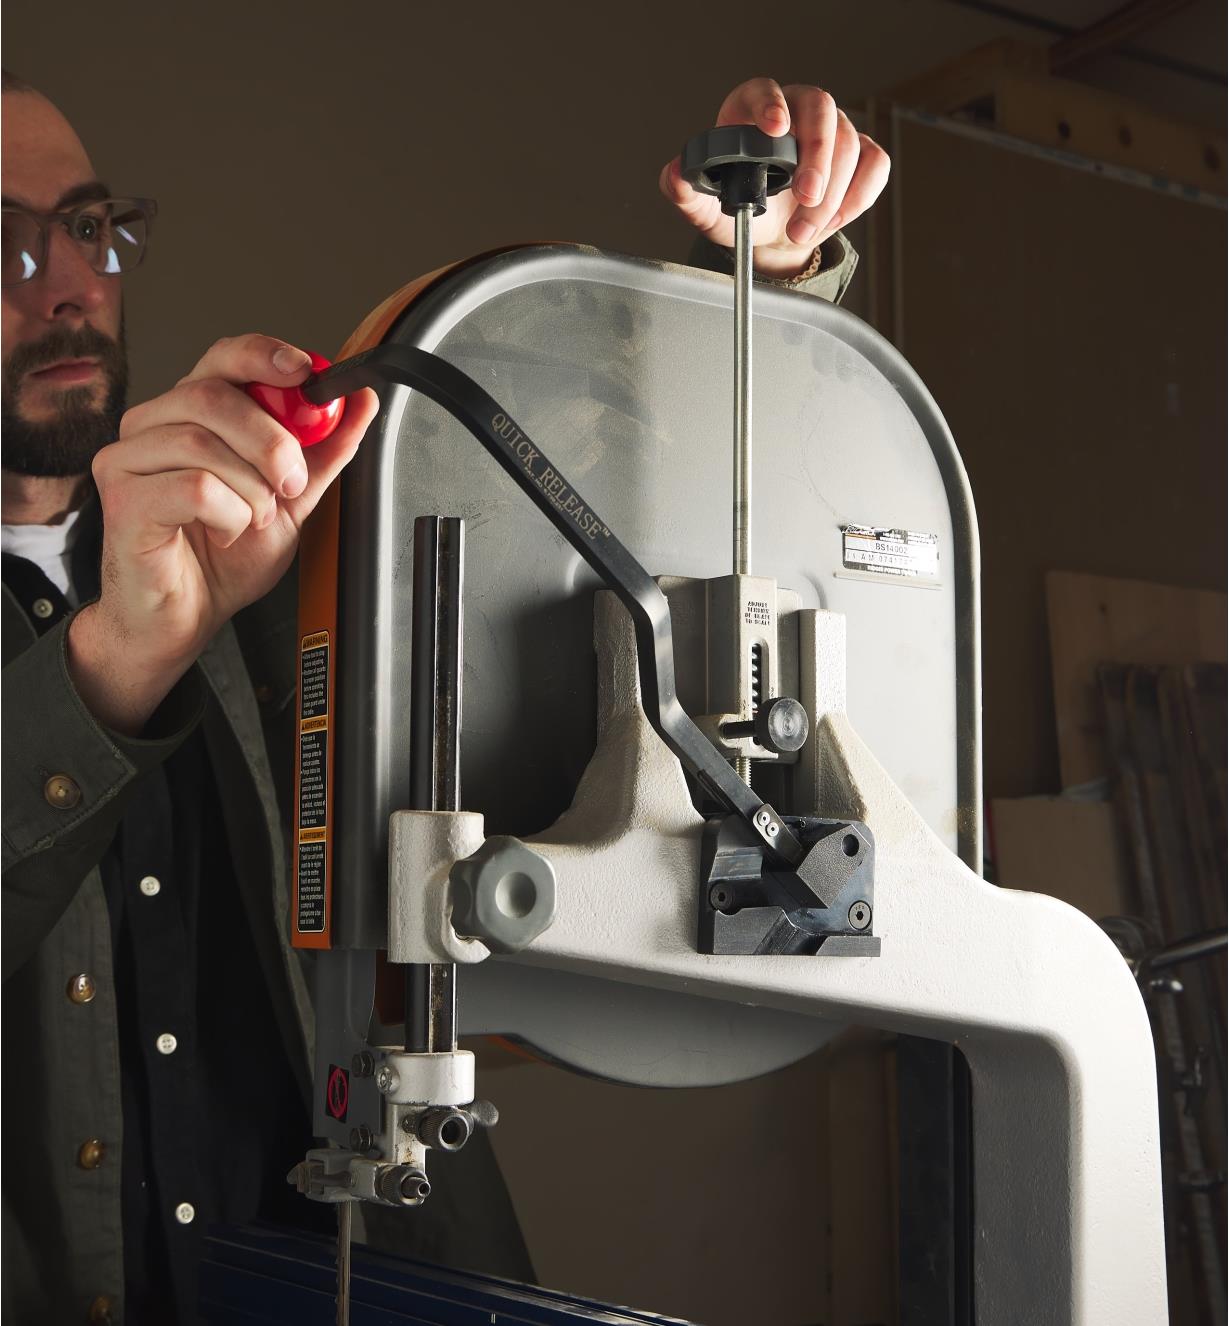 Lowering the Blade Quick-Release handle mounted on a bandsaw